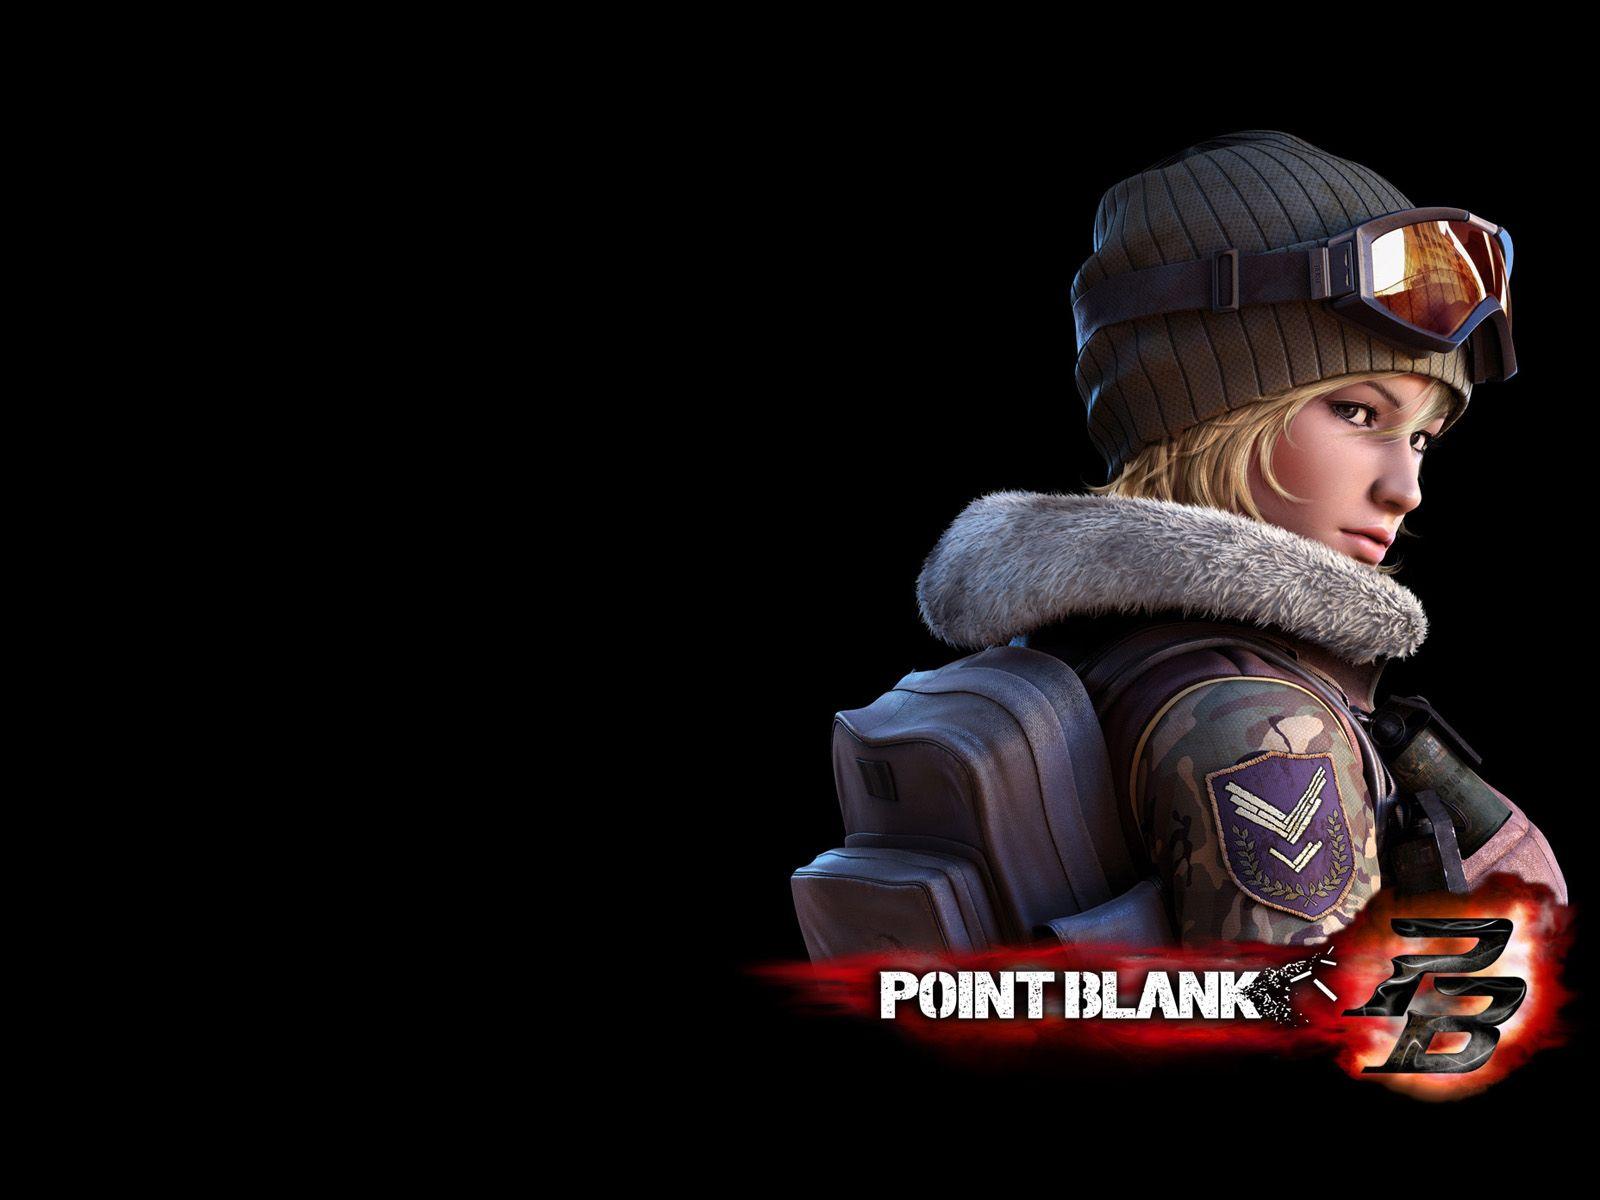 Point Blank Games